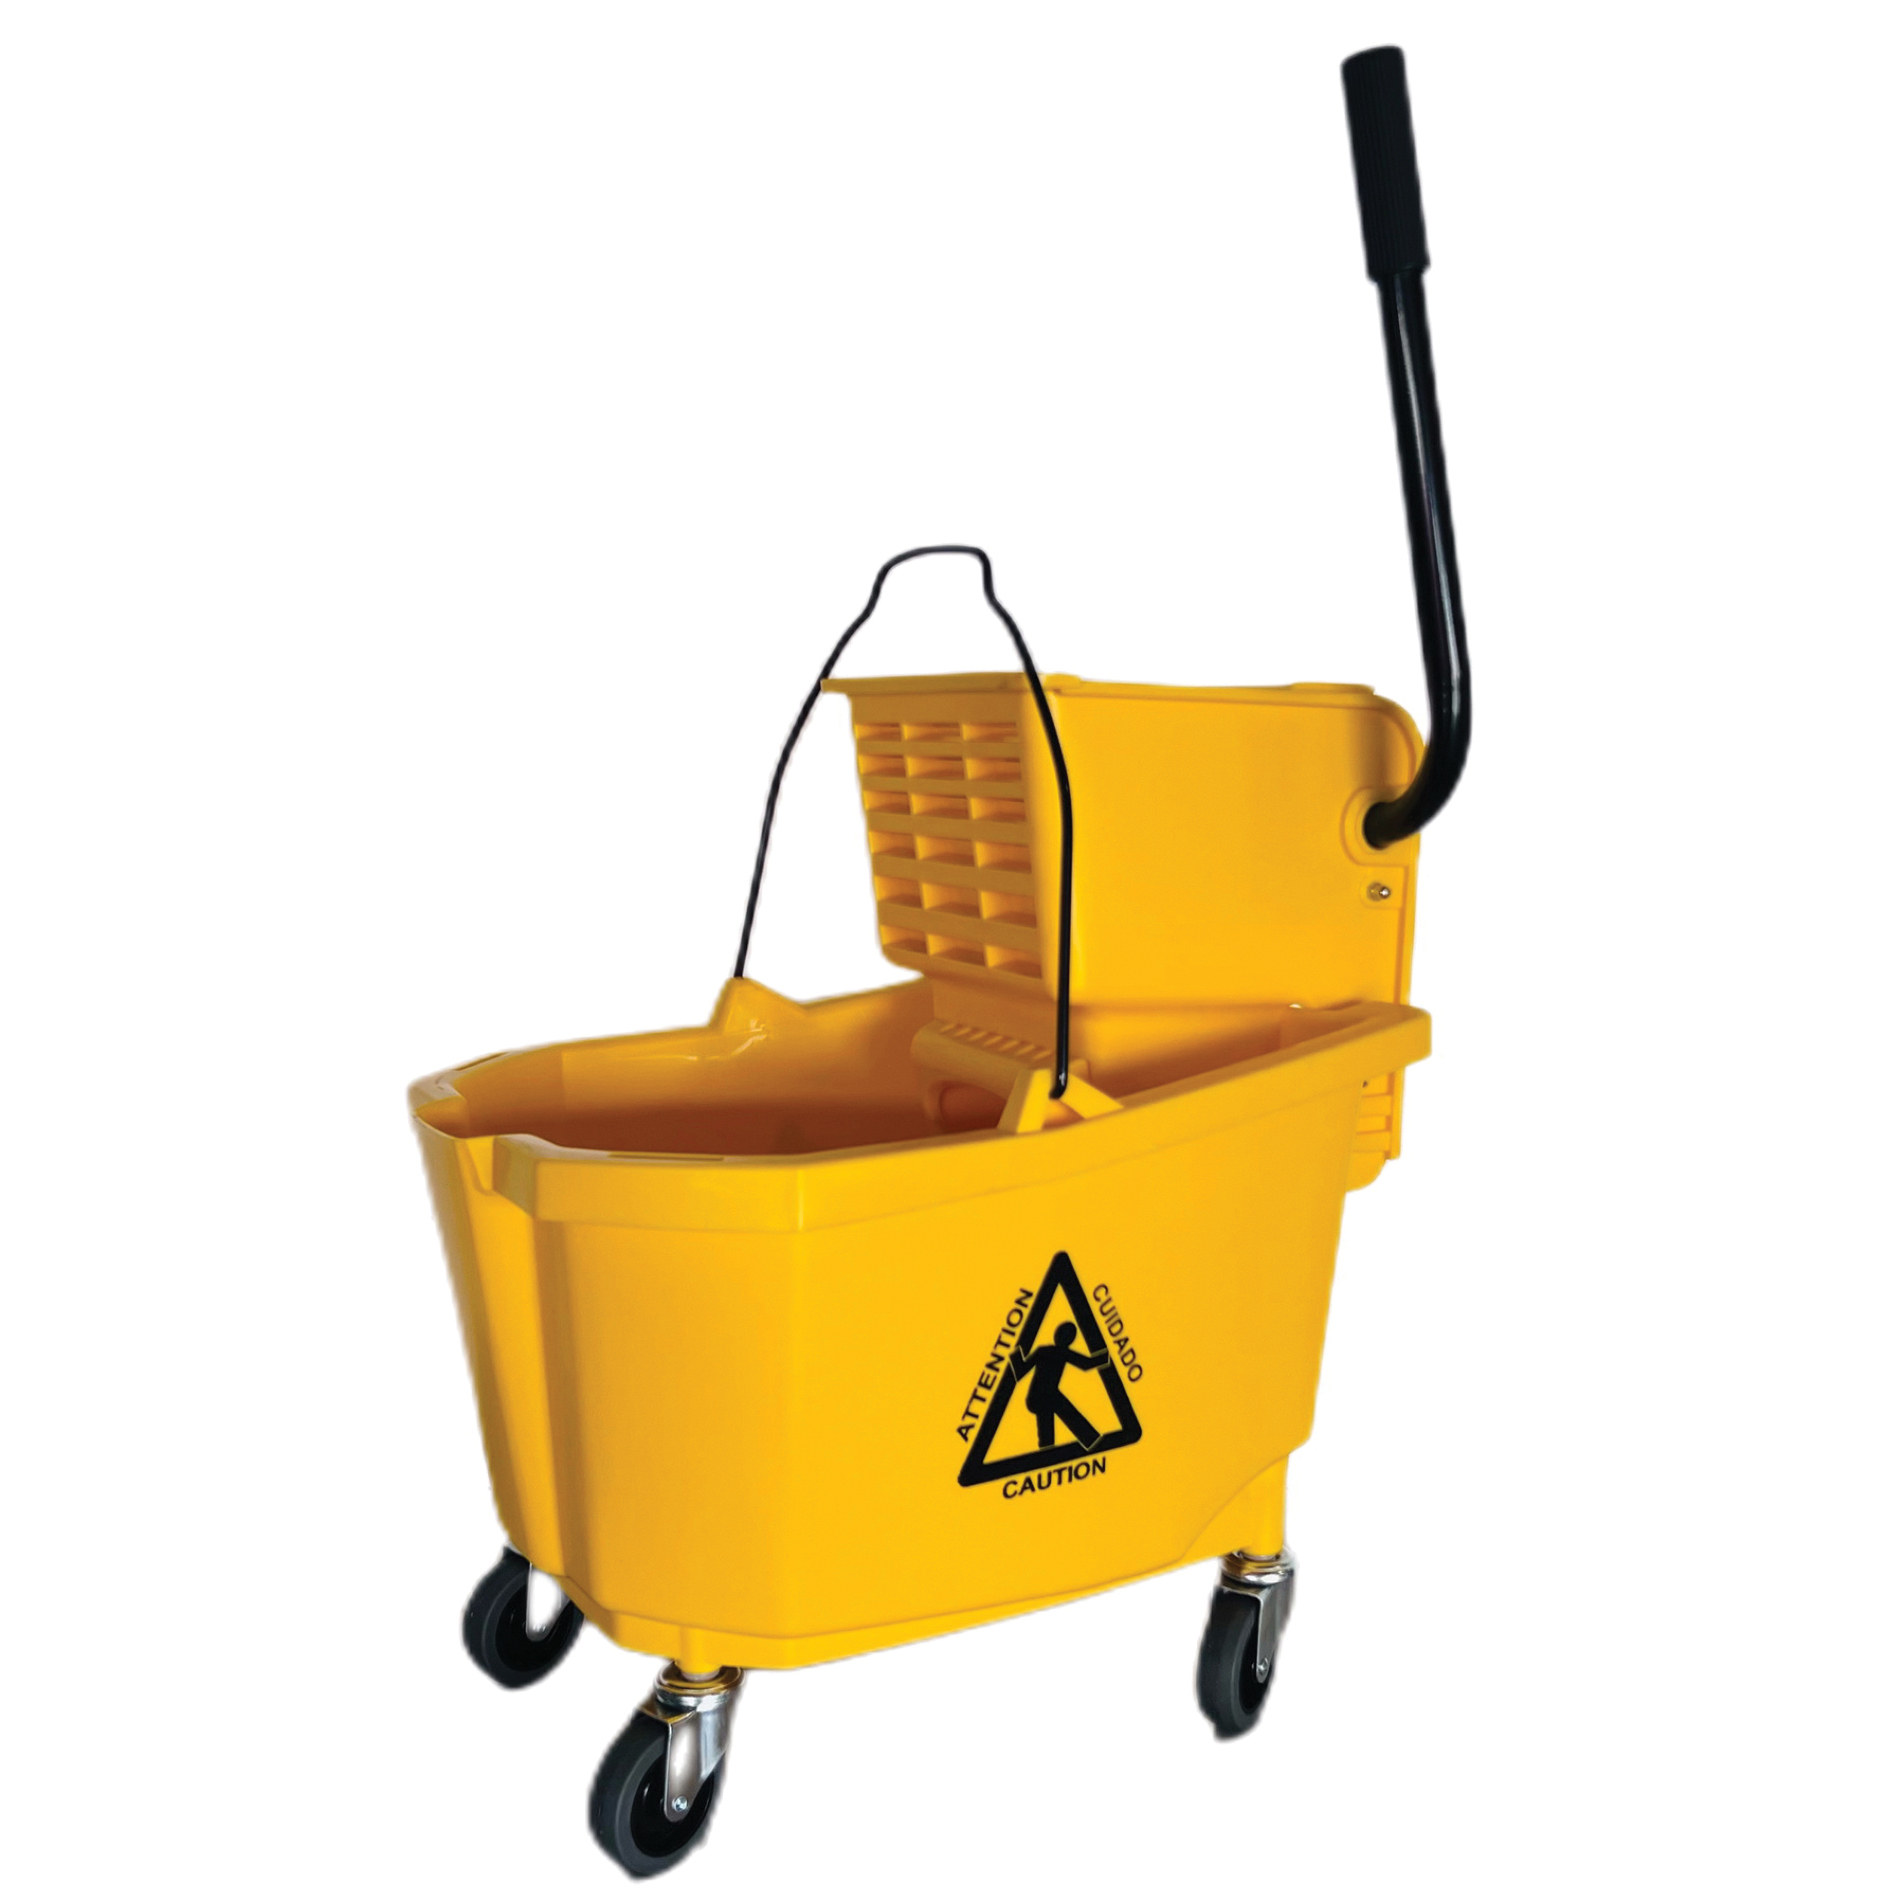 Simple Spaces 9130 Mop Bucket with Ringer, 32 qt Capacity, Plastic Bucket/Pail, Plastic Wringer, Yellow - 2